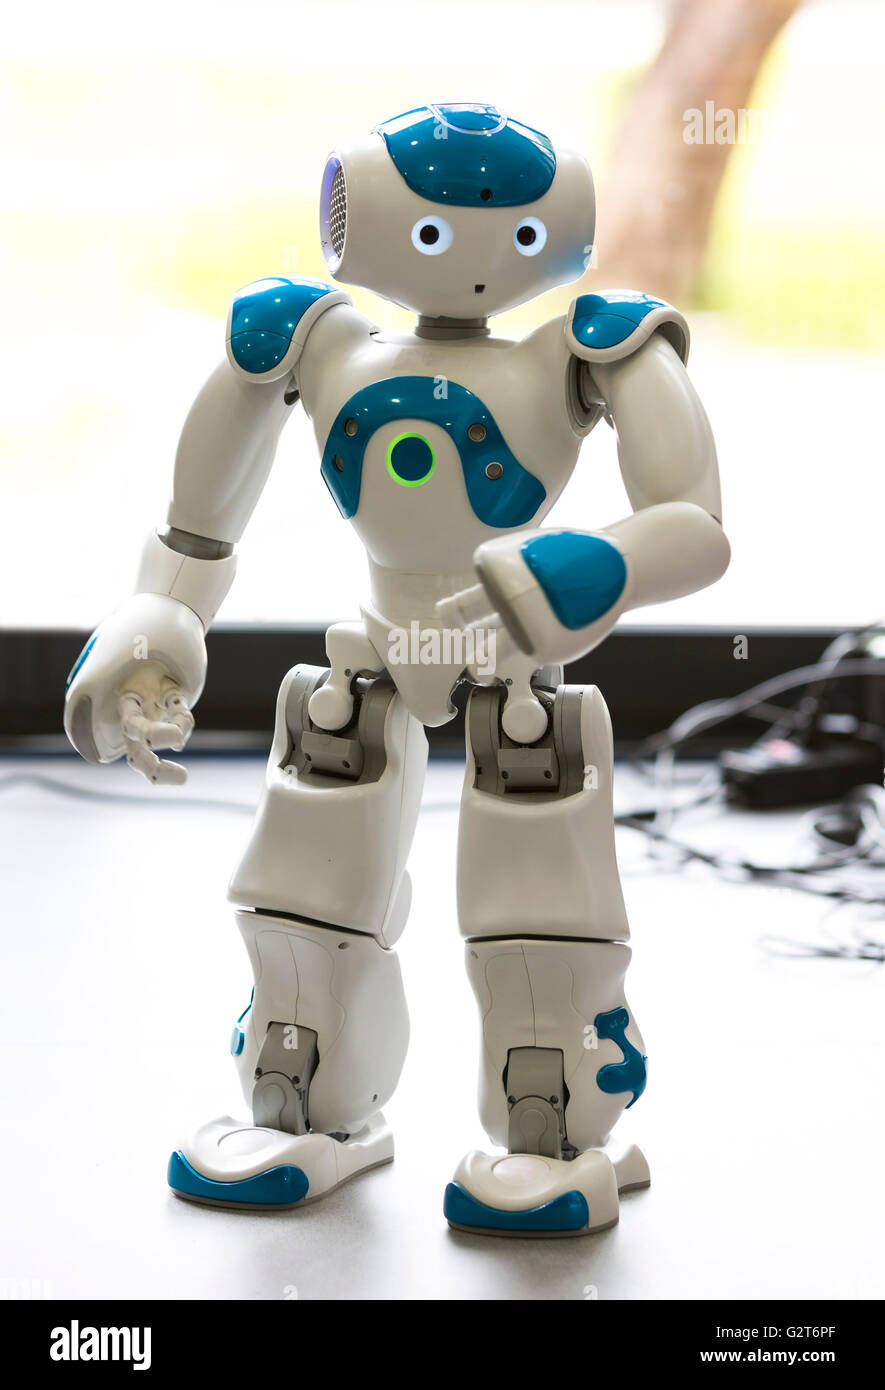 https://c8.alamy.com/comp/G2T6PF/a-small-robot-with-human-face-and-body-humanoid-artificial-intelligence-G2T6PF.jpg